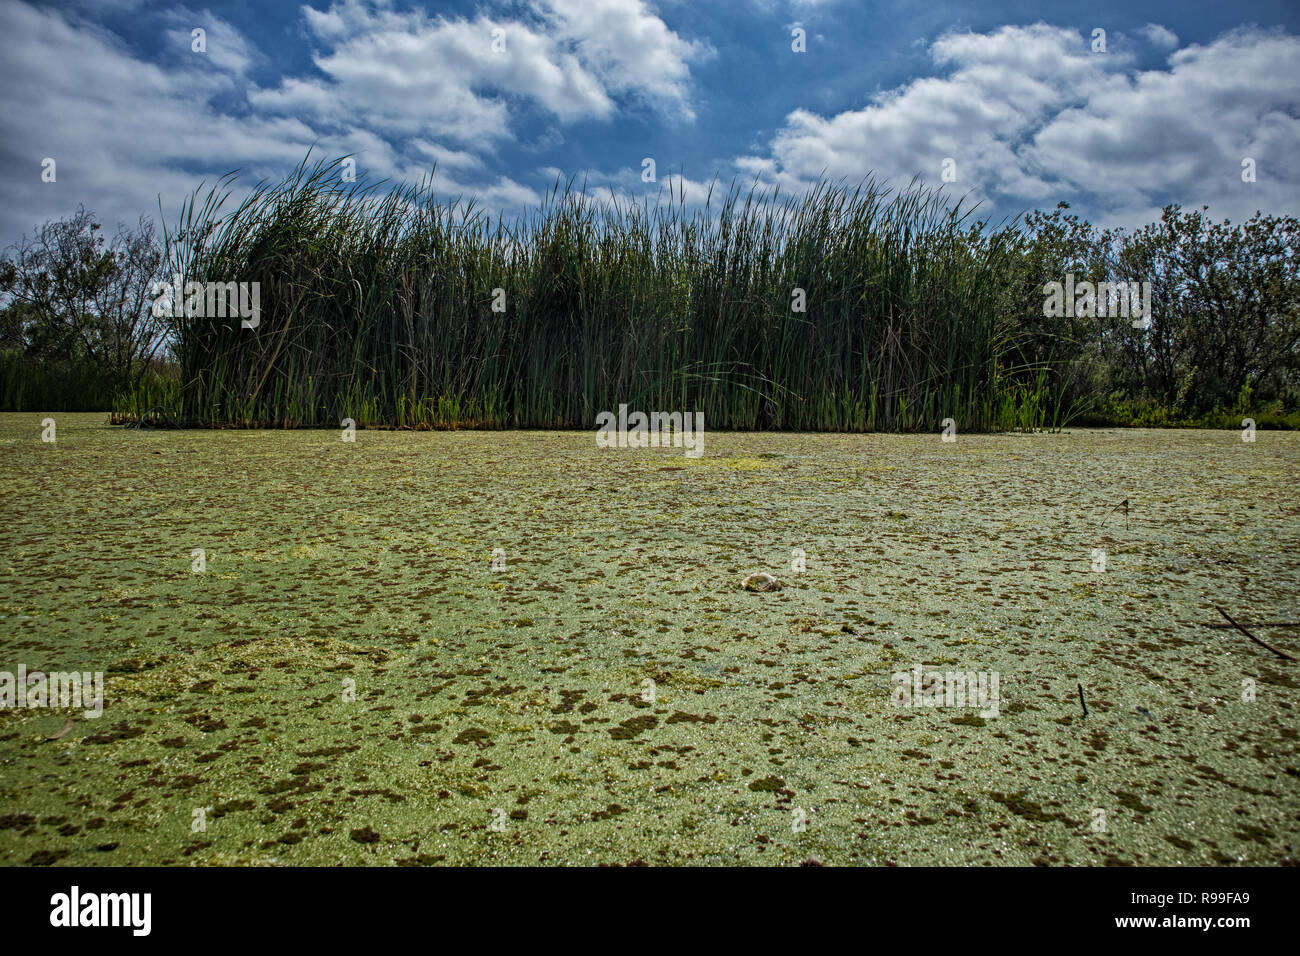 Algae Bloom in Ballona wetlands. The Ballona Wetlands is a protected area near Marina Del Rey and Playa Del Rey, and is one of the last significant we Stock Photo